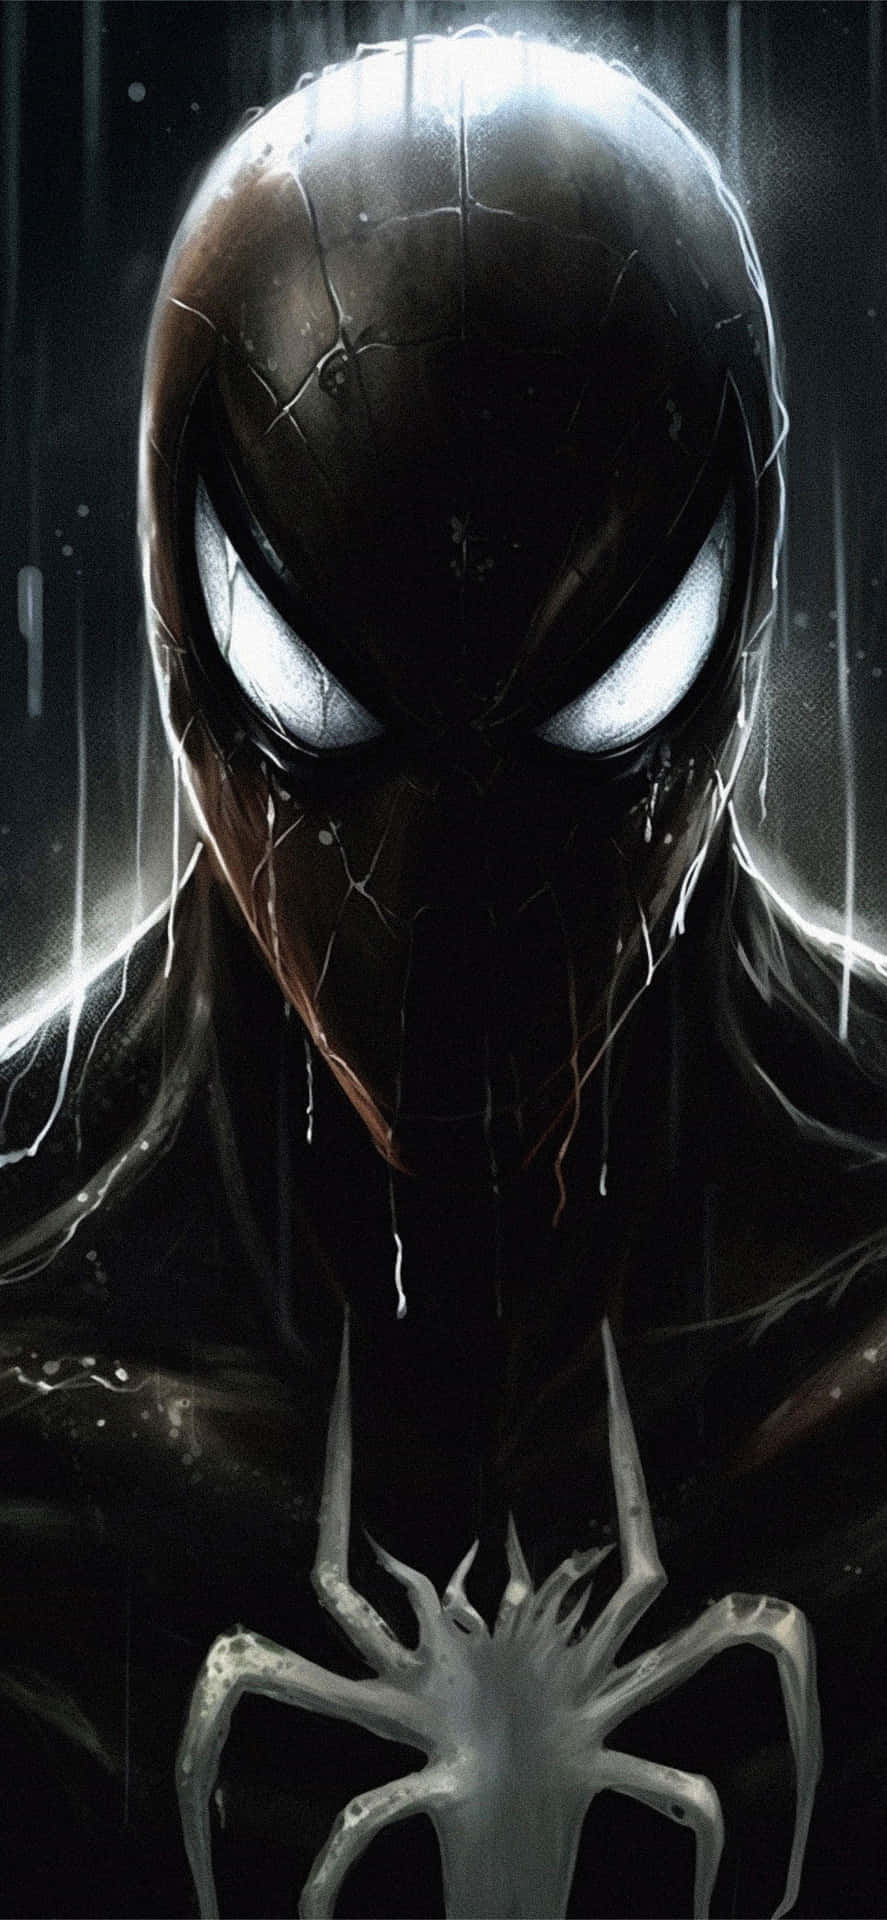 Symbiote Unleashed - An Intense, Action-Packed Display of Power Wallpaper